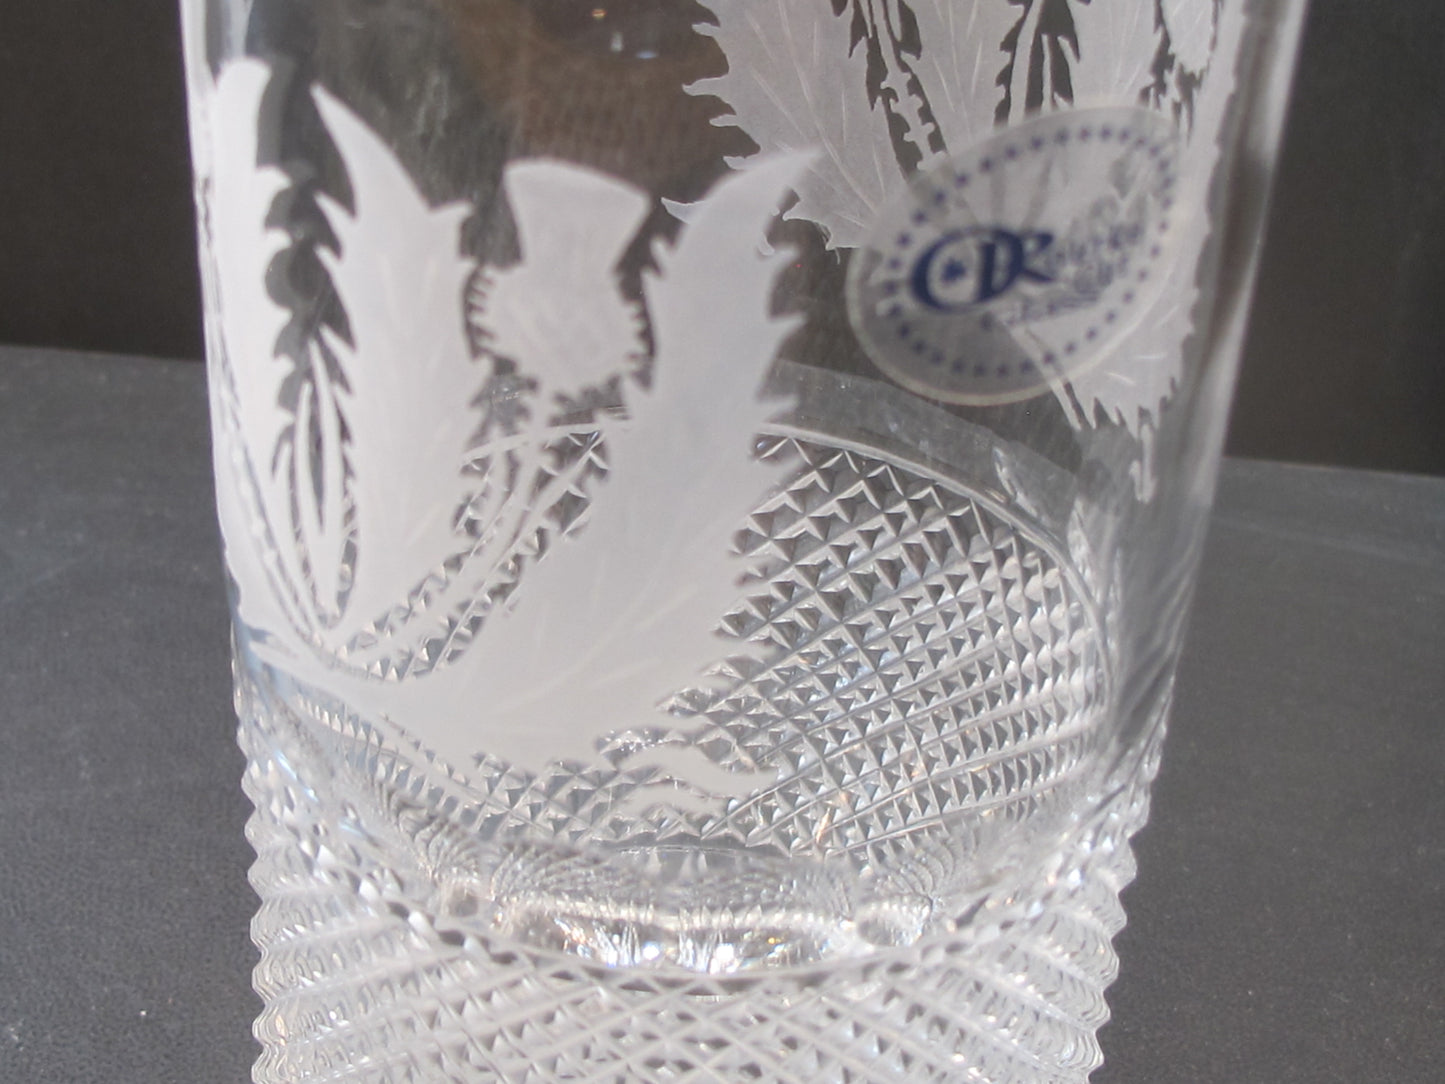 Hand Cut Crystal thistle hi-ball Signed O'Rourke